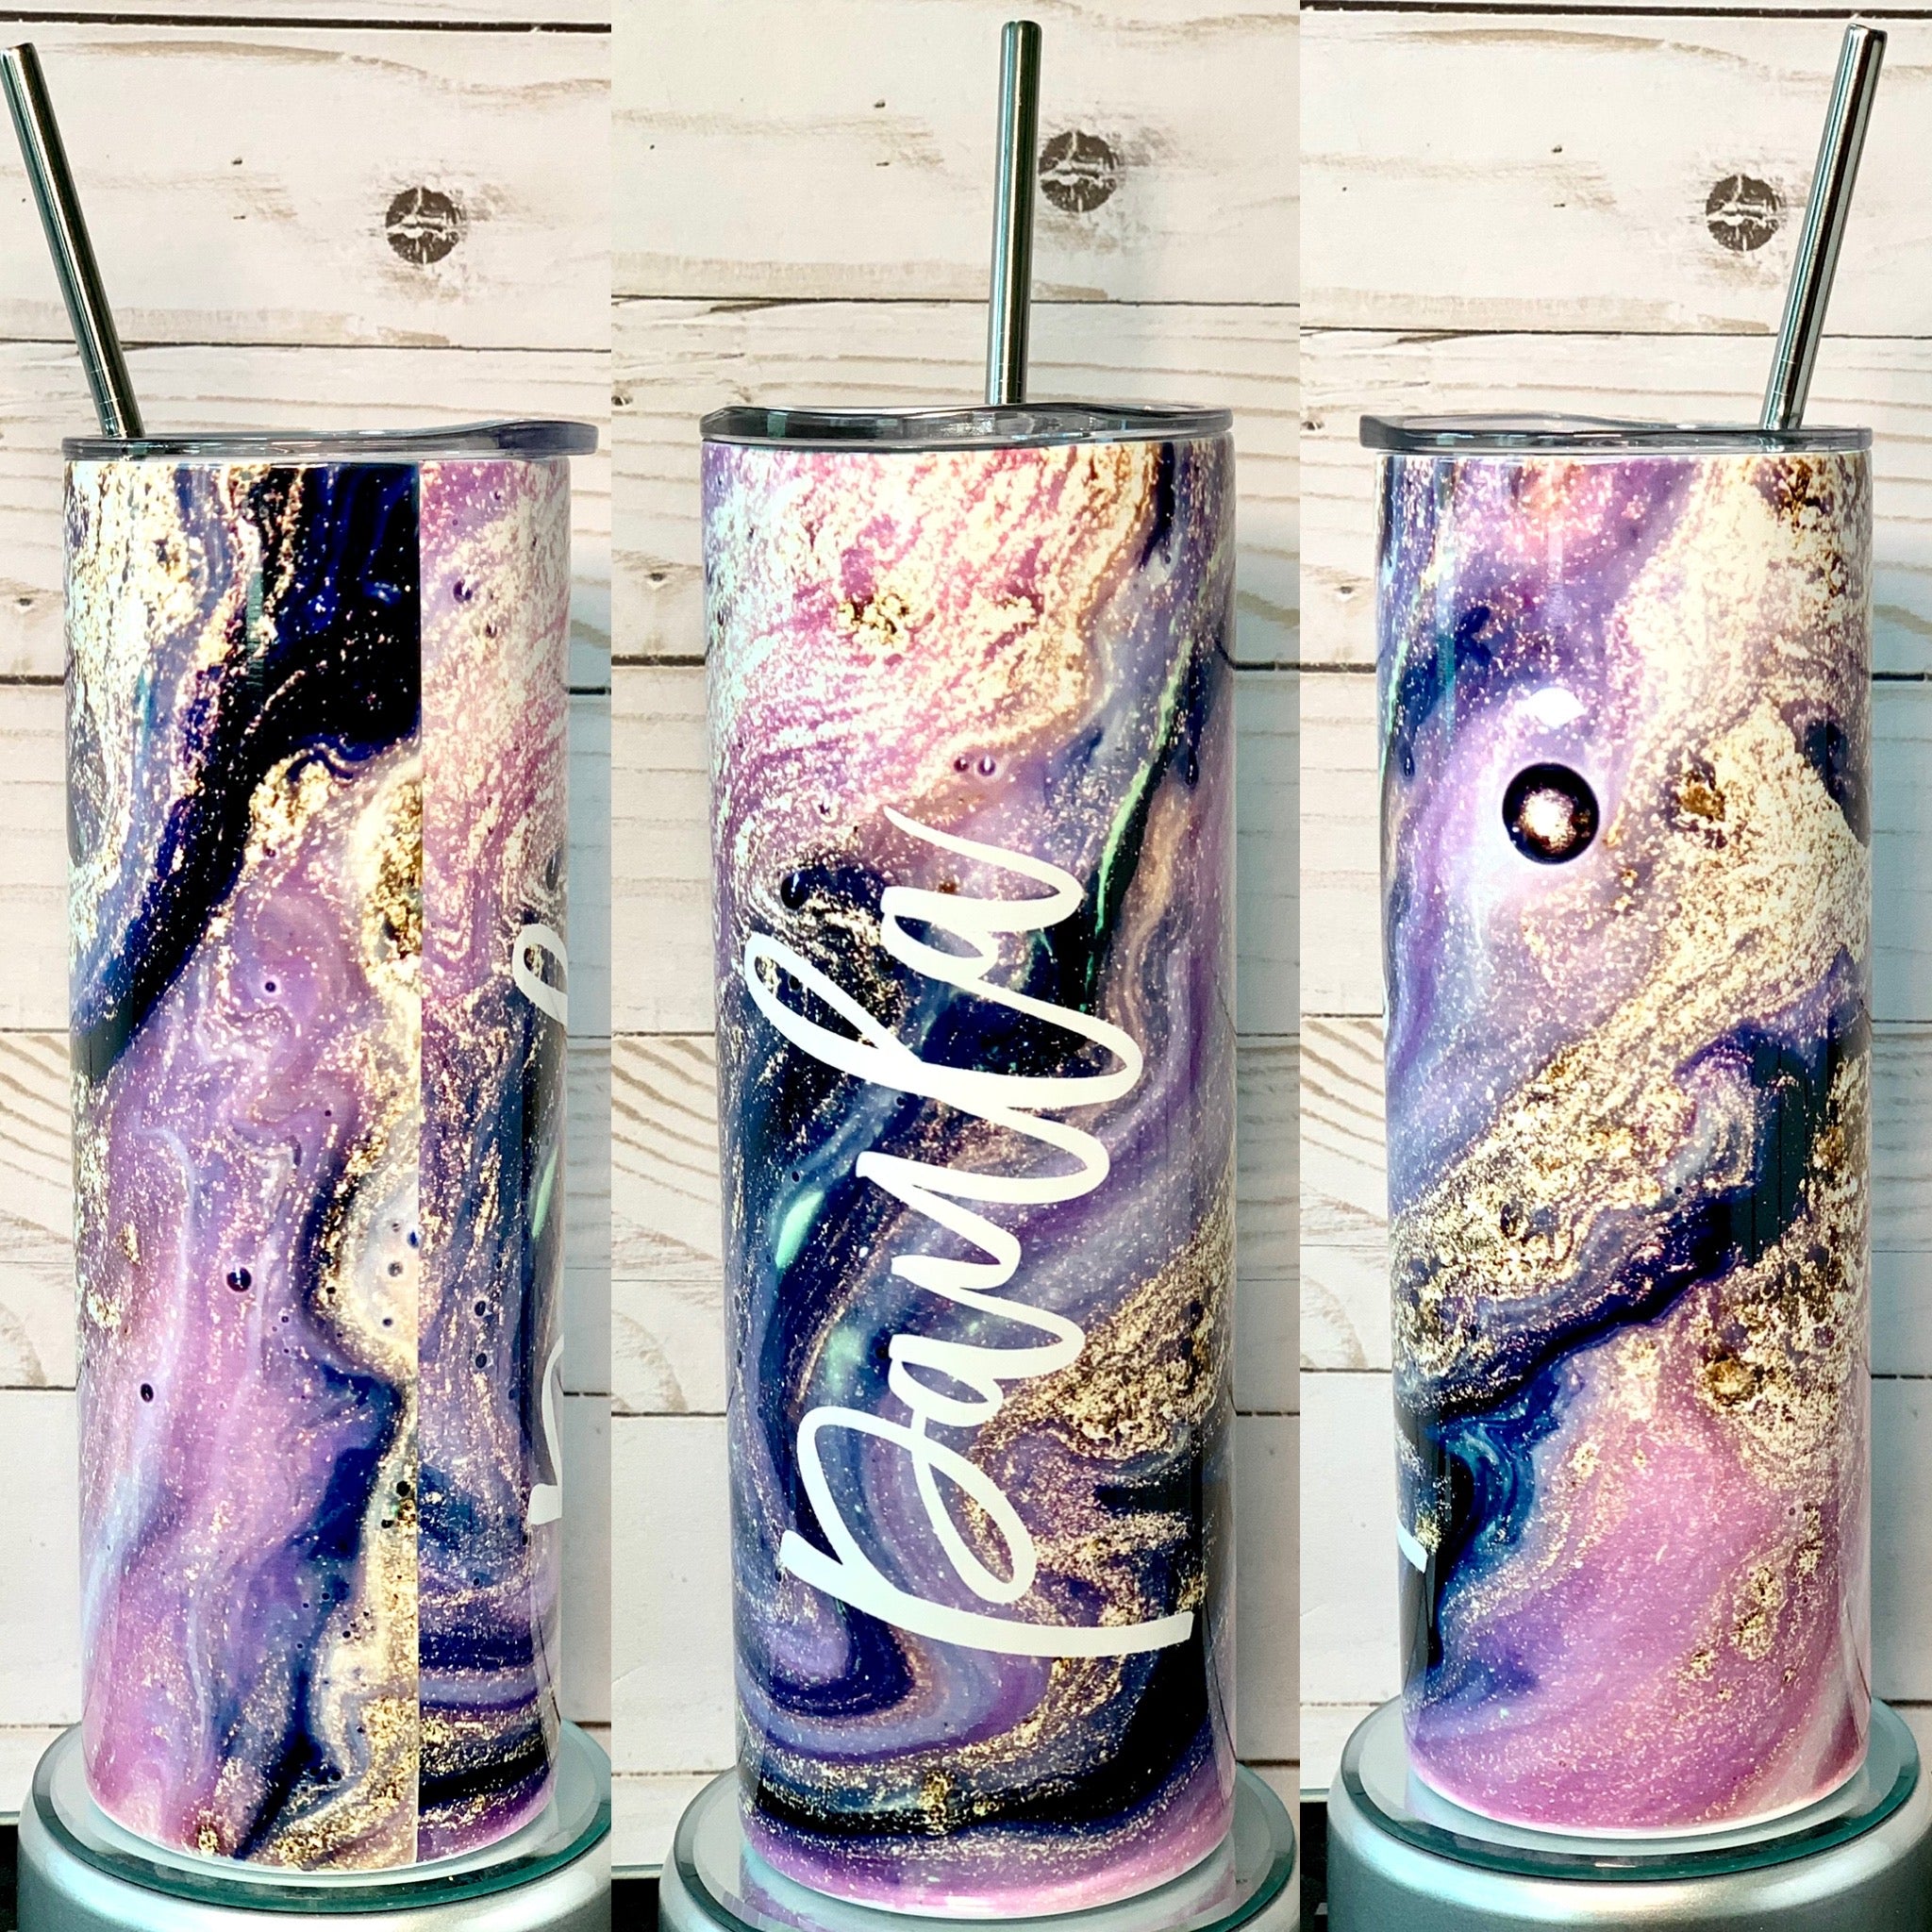 Purple Galaxy Glitter 20oz Skinny Tumbler - Double Wall Stainless